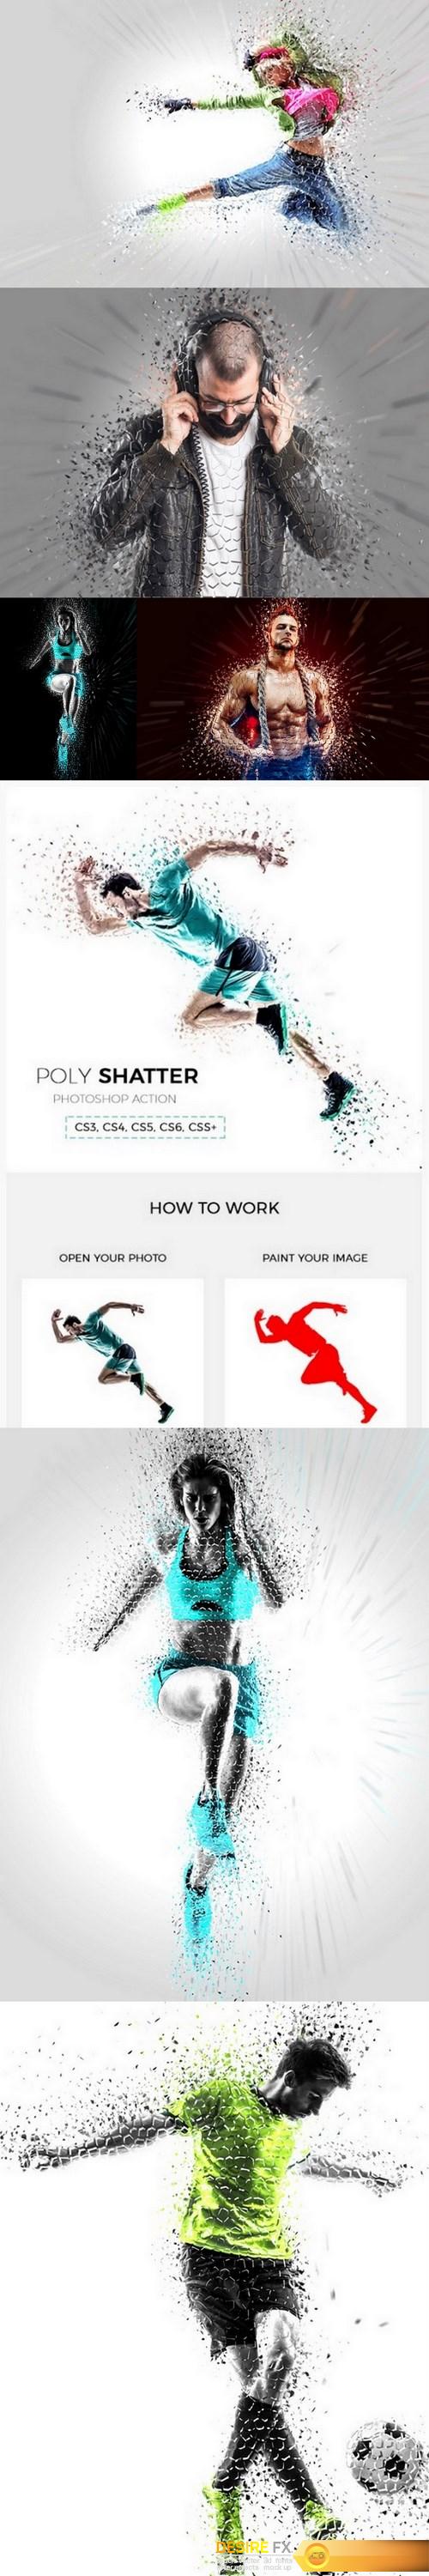 graphicriver-20990277-poly-shatter-photoshop-action